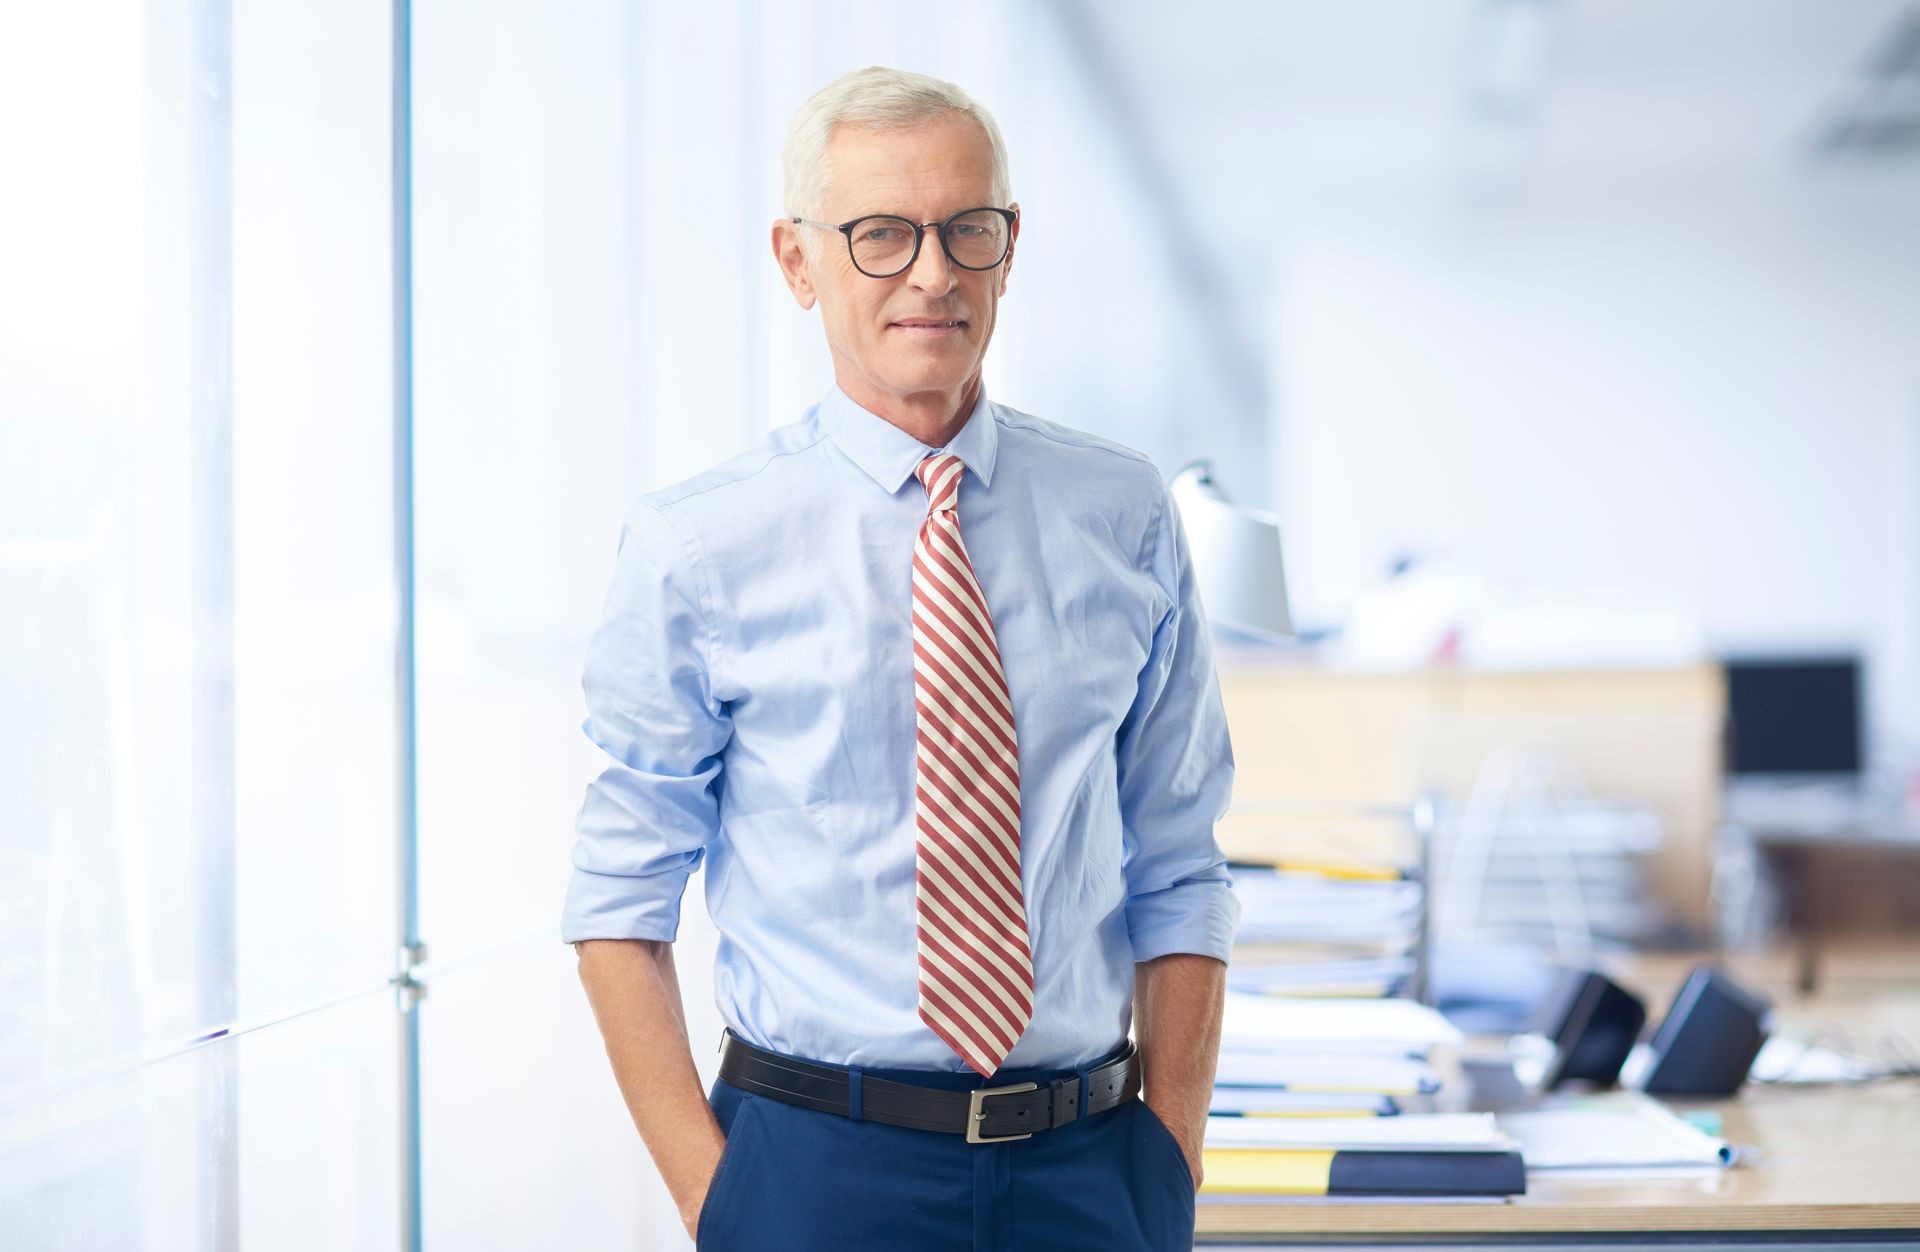 Senior businessman wearing rolled up sleeves shirt and tie while standing at the office.